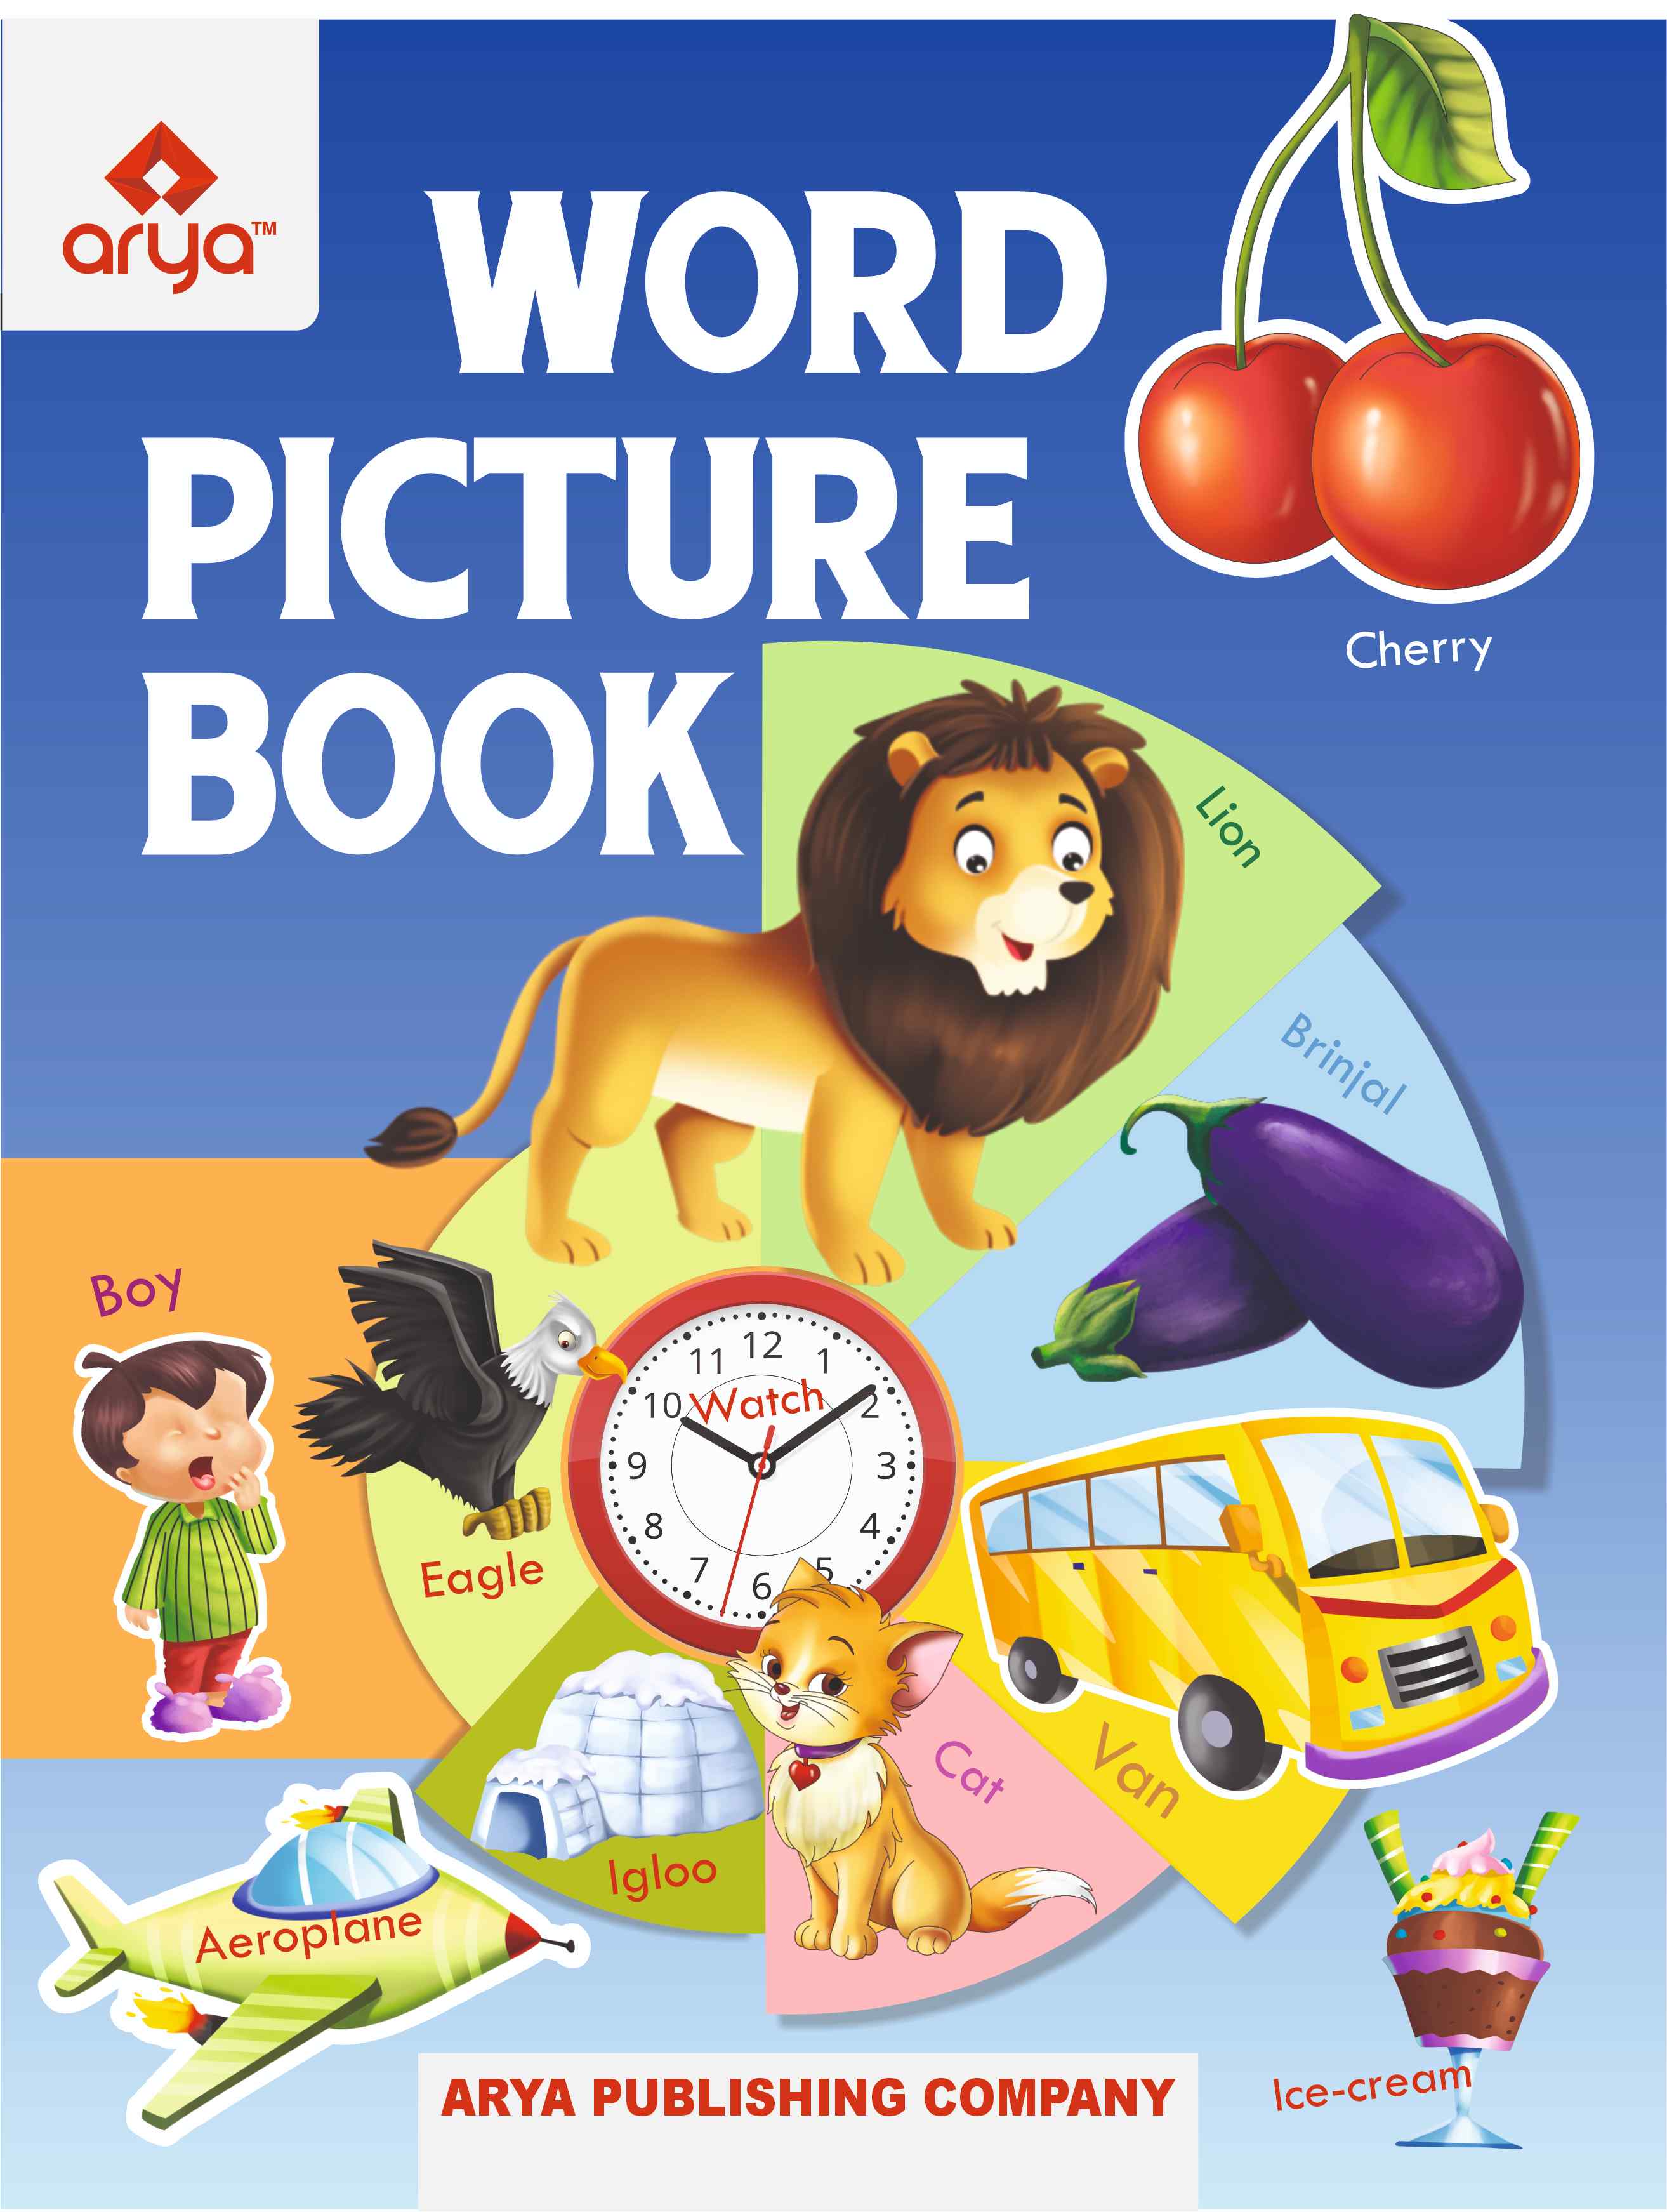 Word Picture Book (Printed on Art Paper)